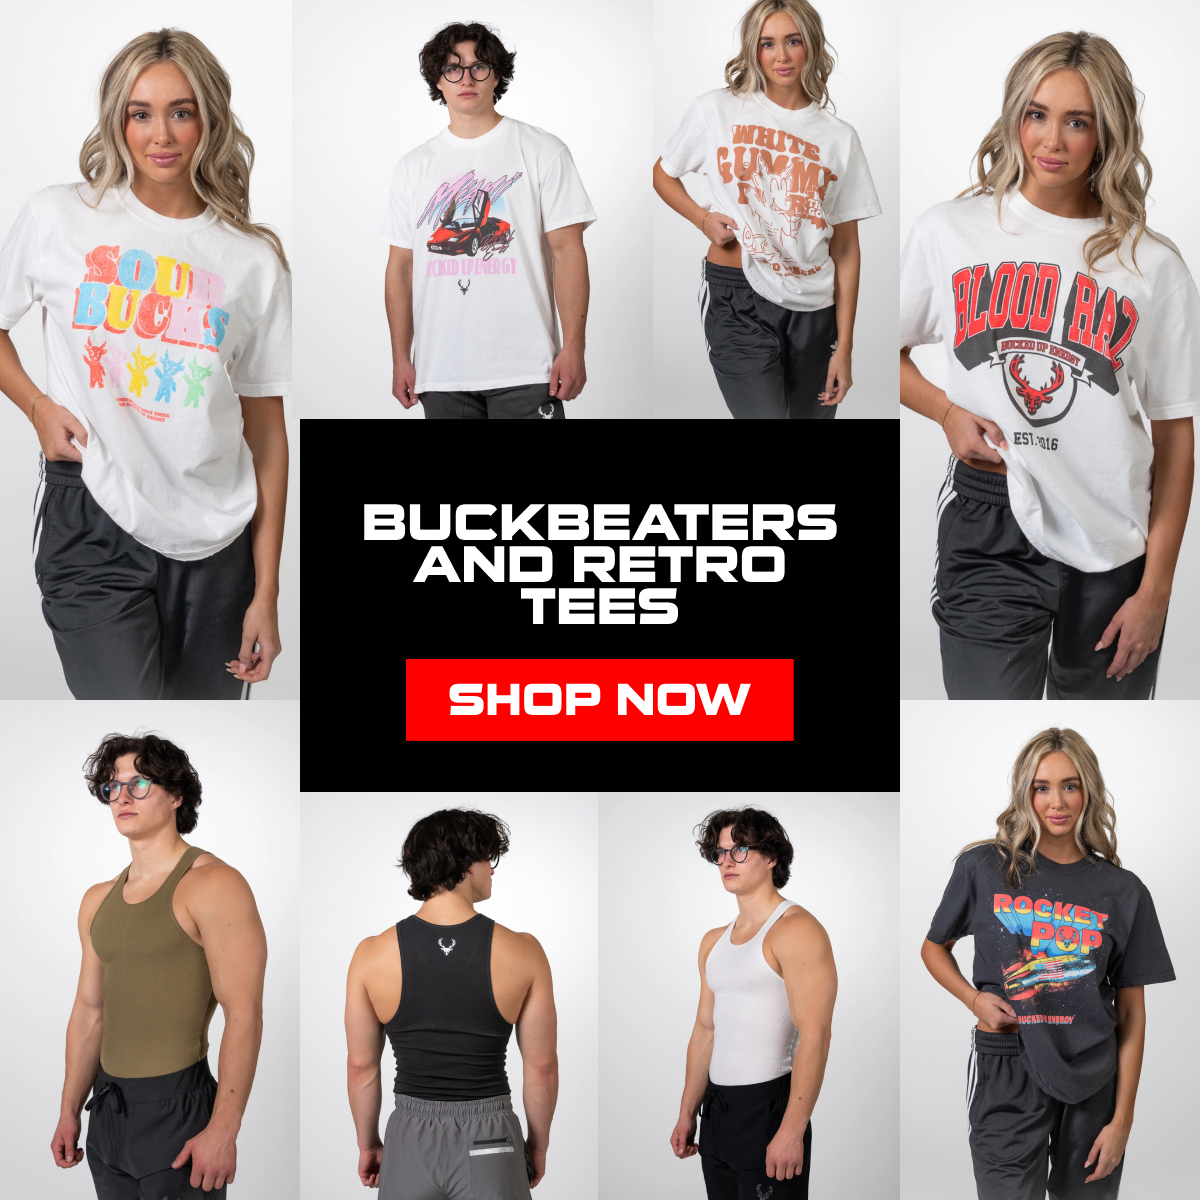 New Apparel - Buckbeaters and Retro T-Shirts